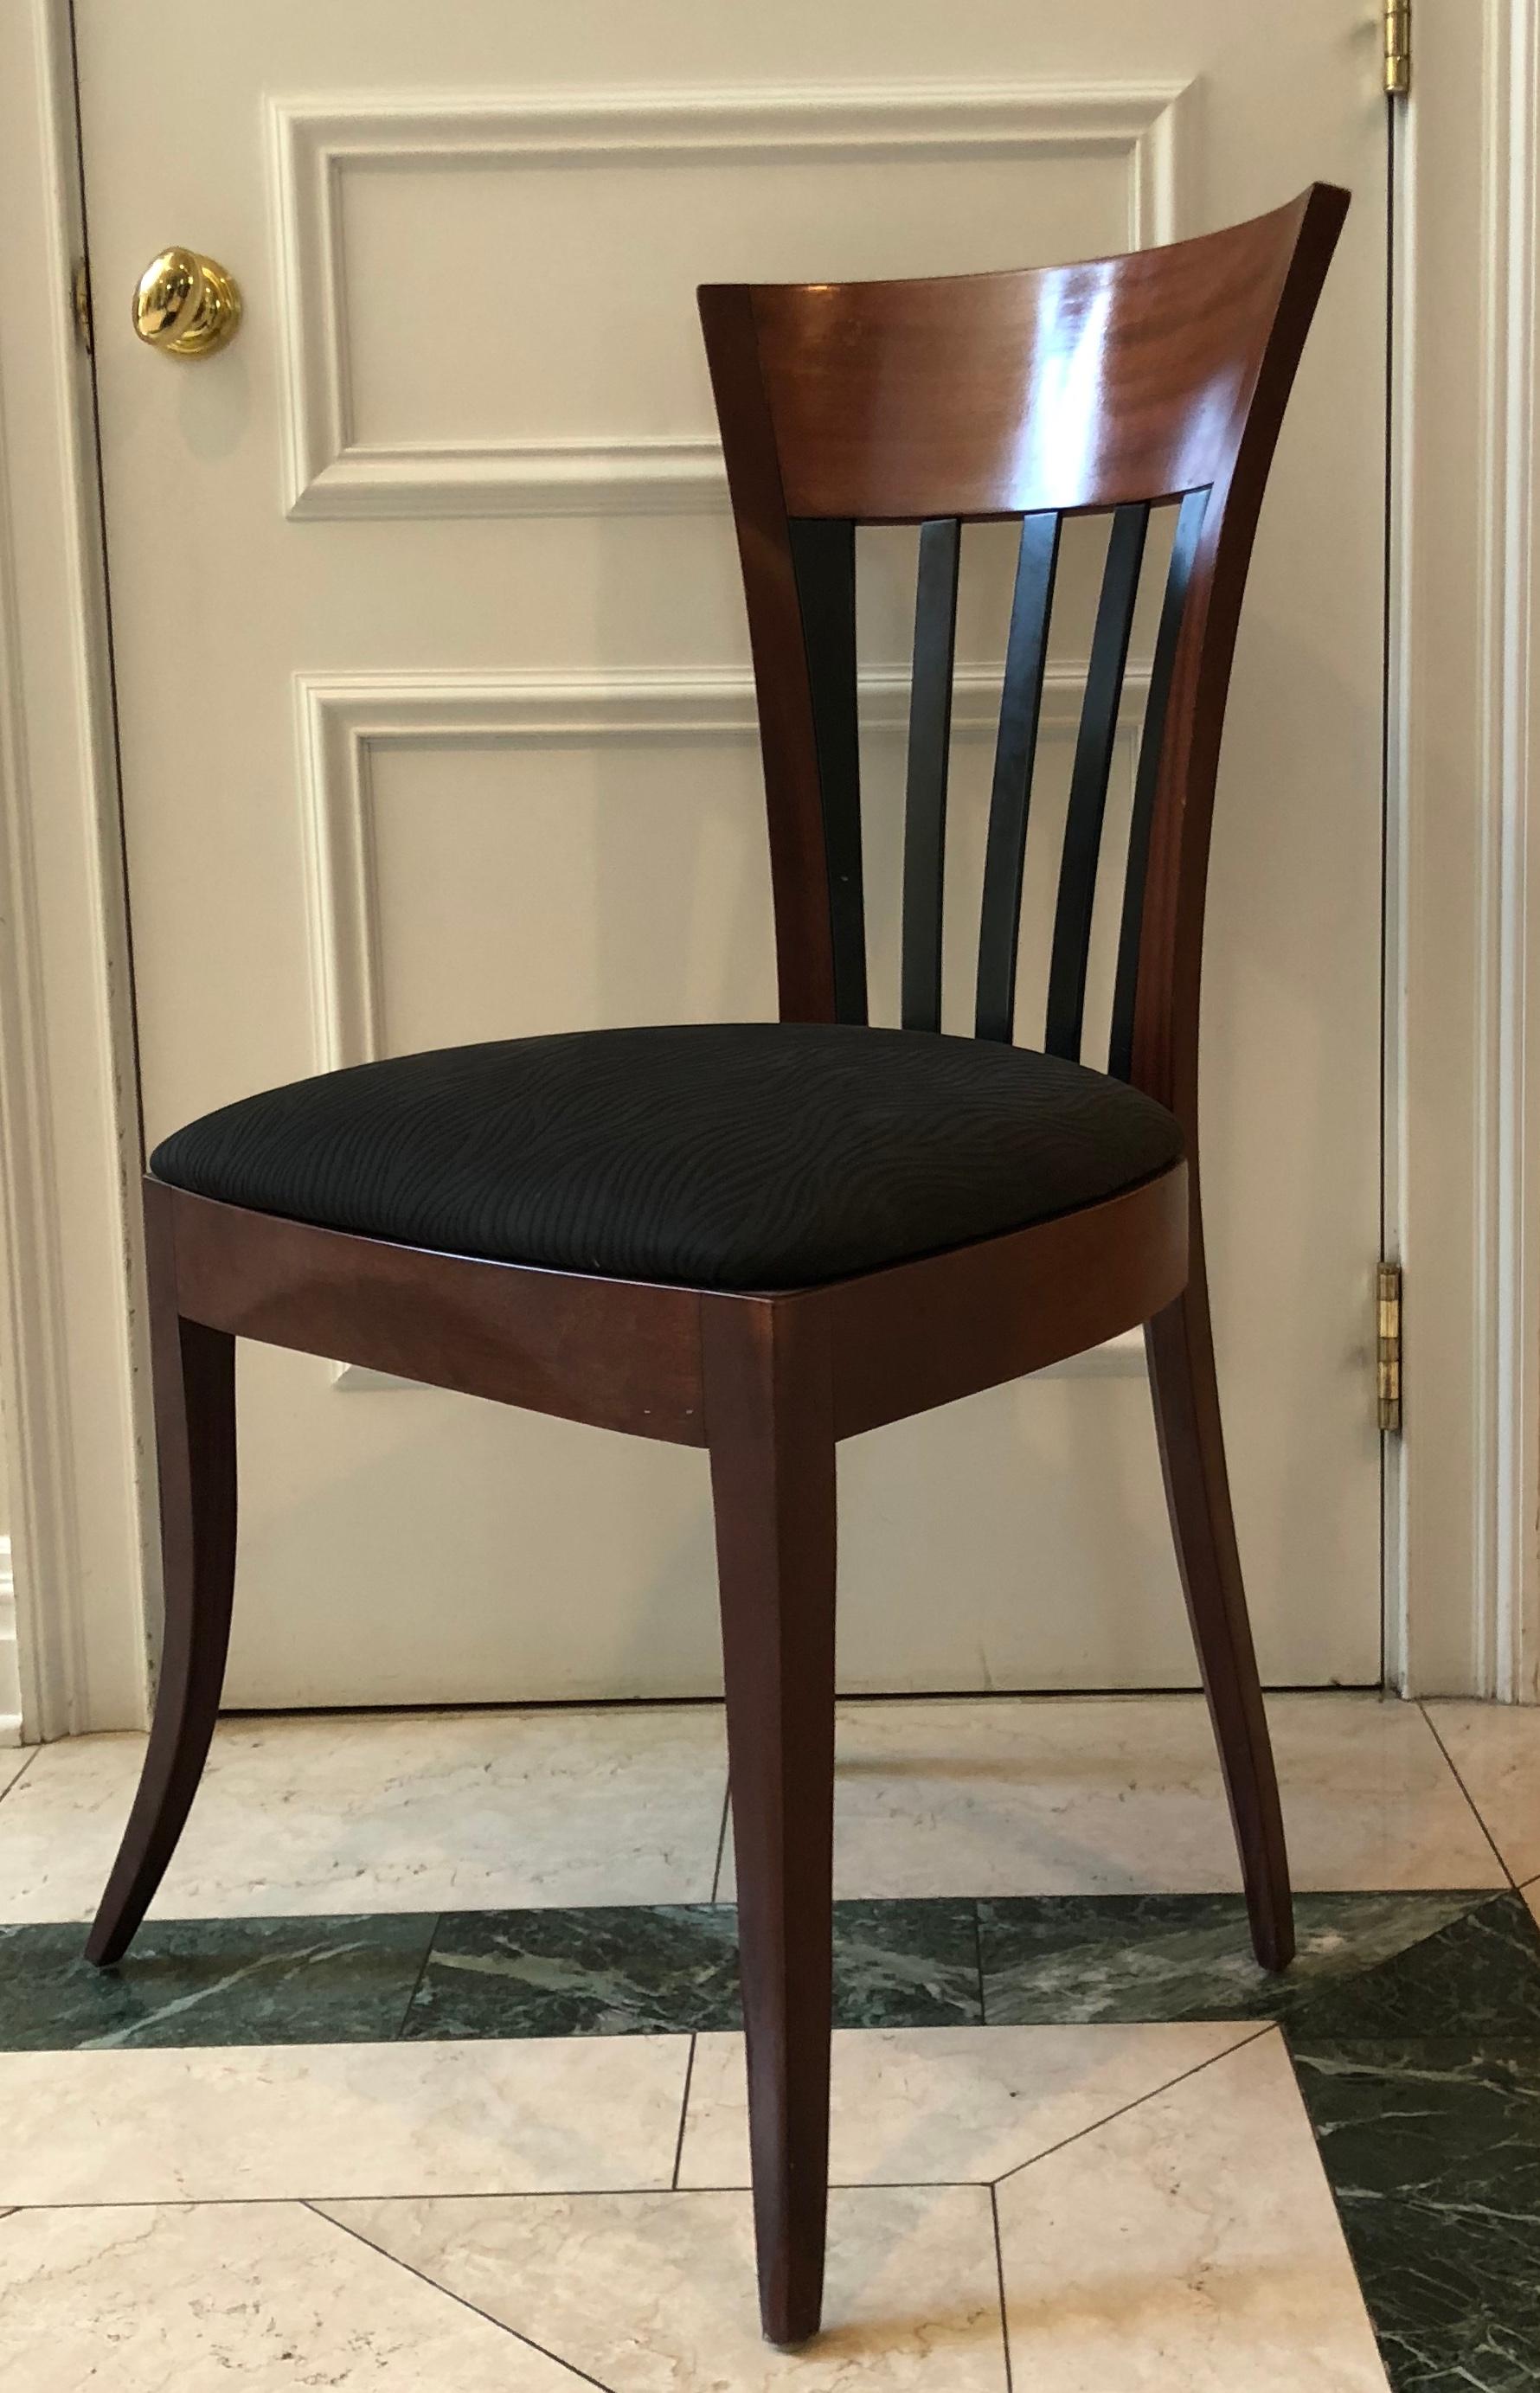 A set of 7 slat-back Rebecca chairs by Adam Tihany for Pace collection in mahogany with ebony slatted backs. The seats are upholstered in a matte black material.